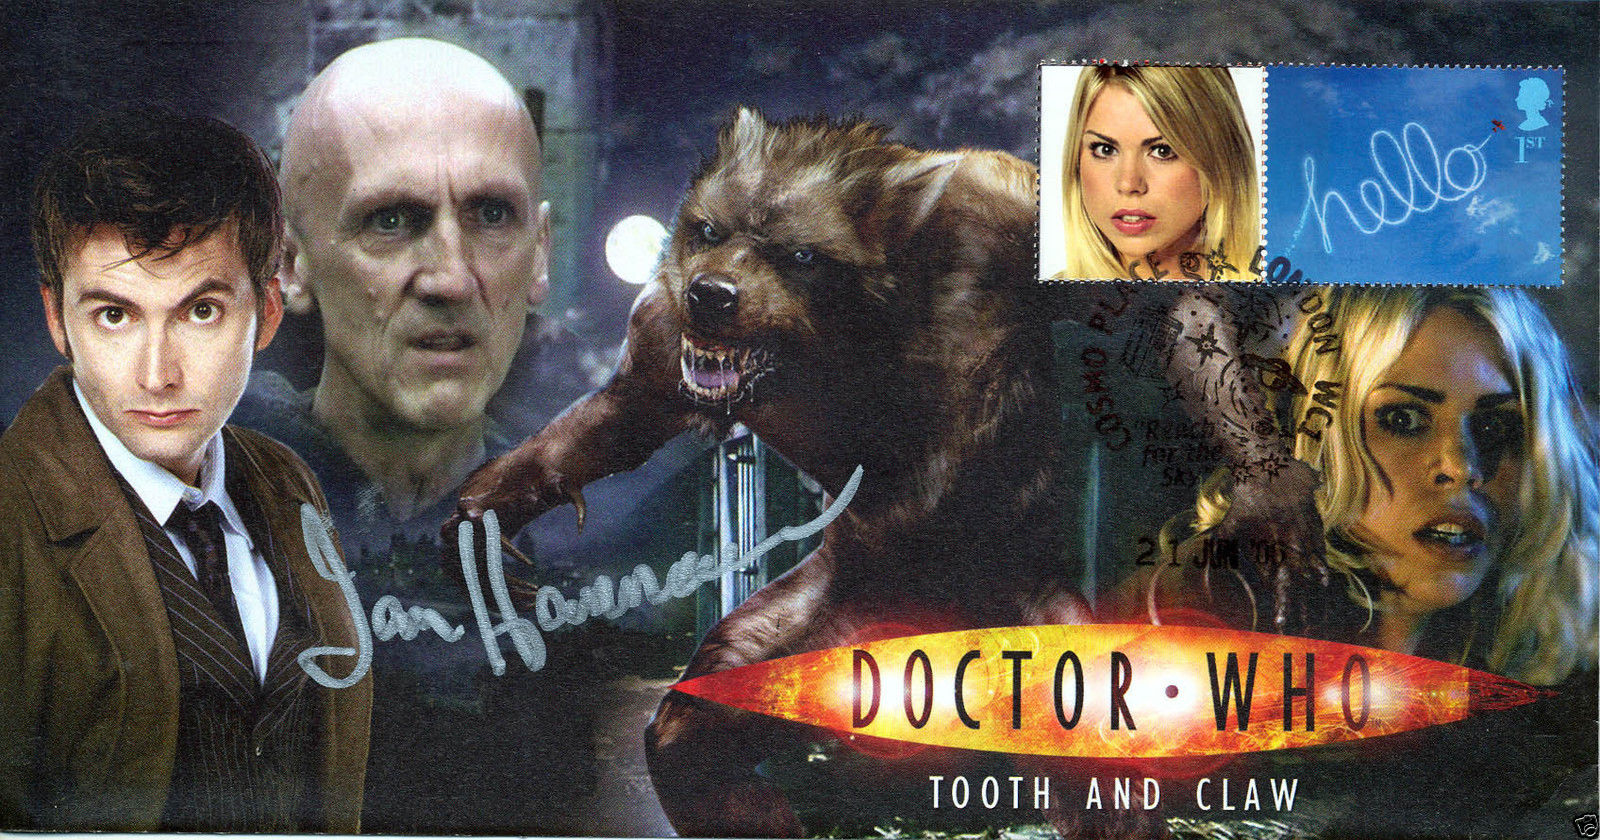 Doctor Who 2006 Series 2 Episode Tooth & Claw Collectible Stamp Cover Signed by IAN HANMORE